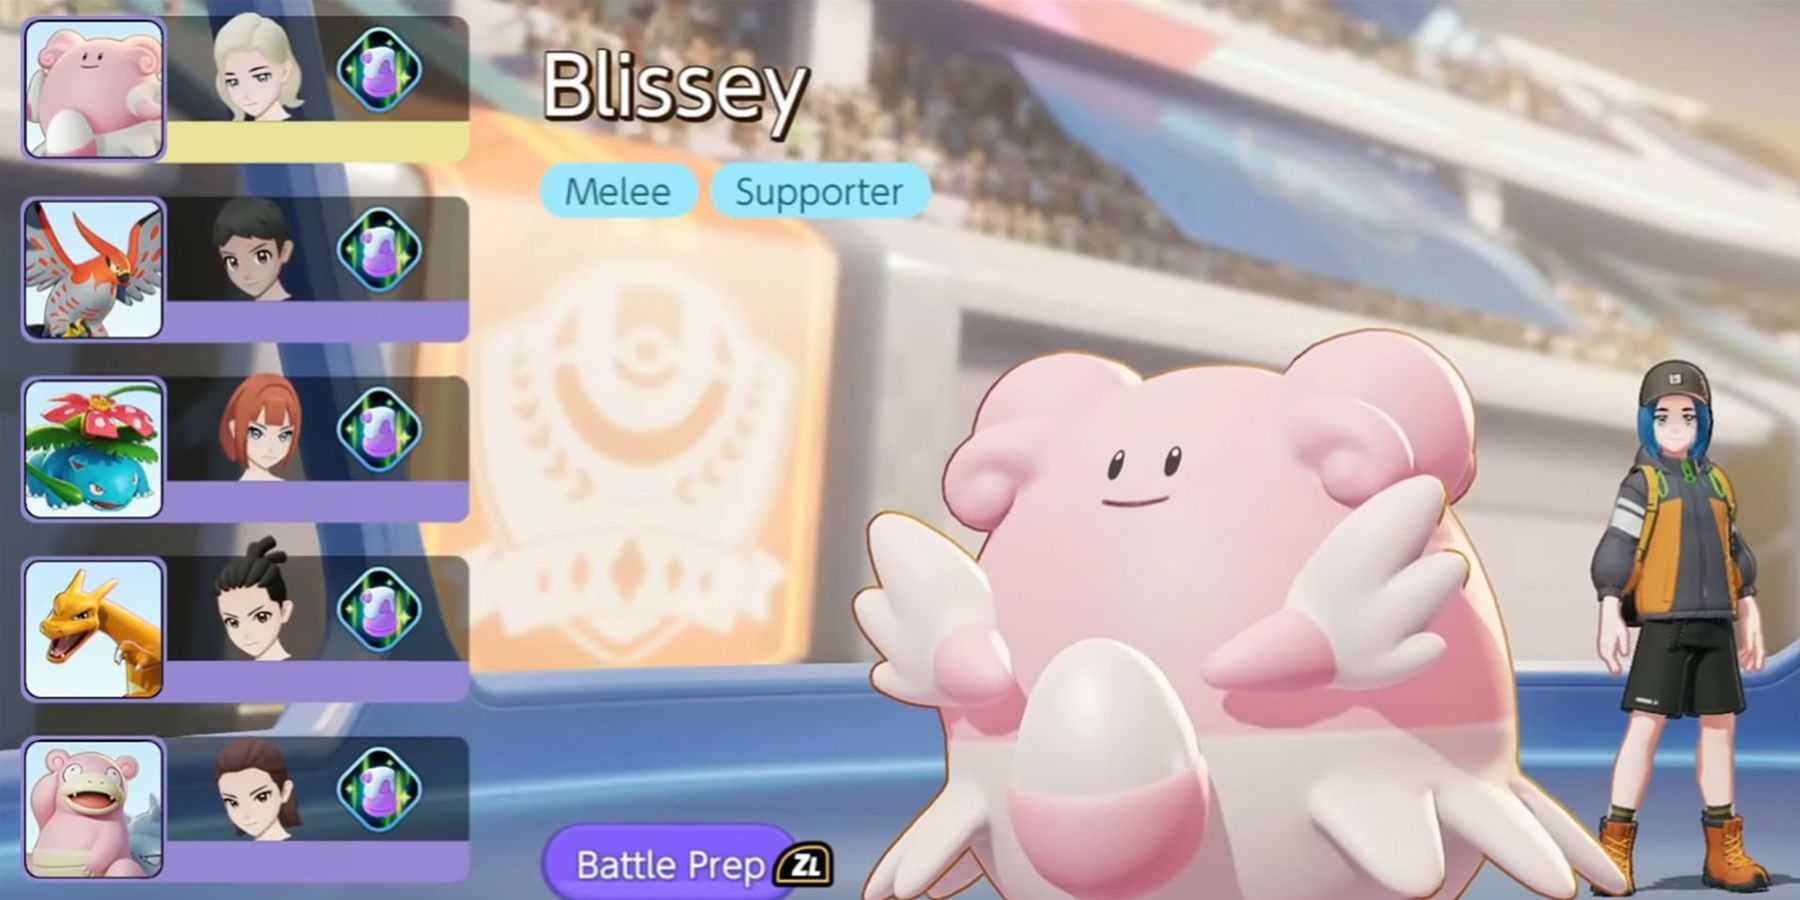 Blissey with teammates